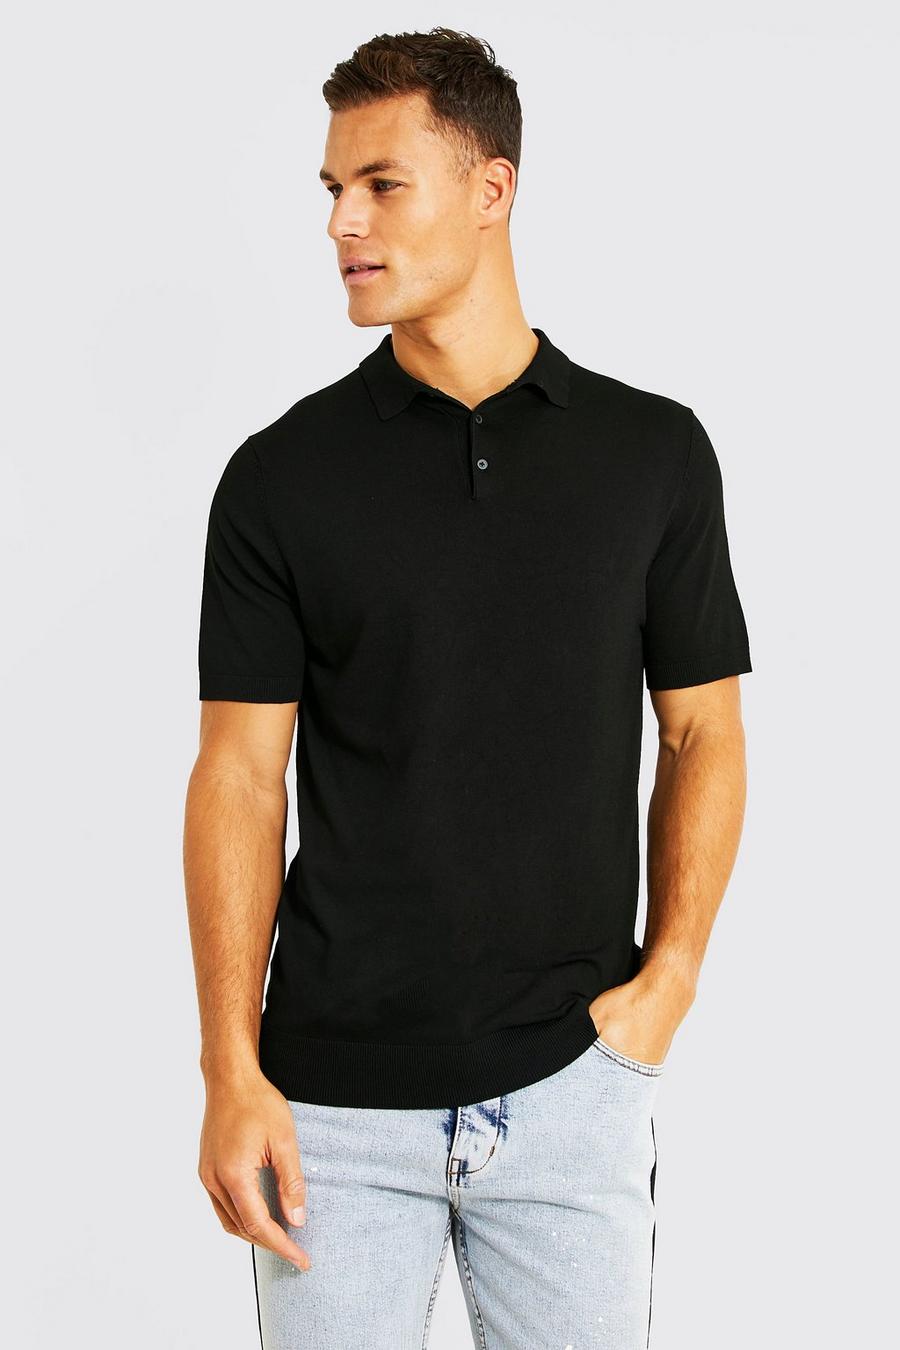 Black Tall Recycled Short Sleeve Knitted Polo